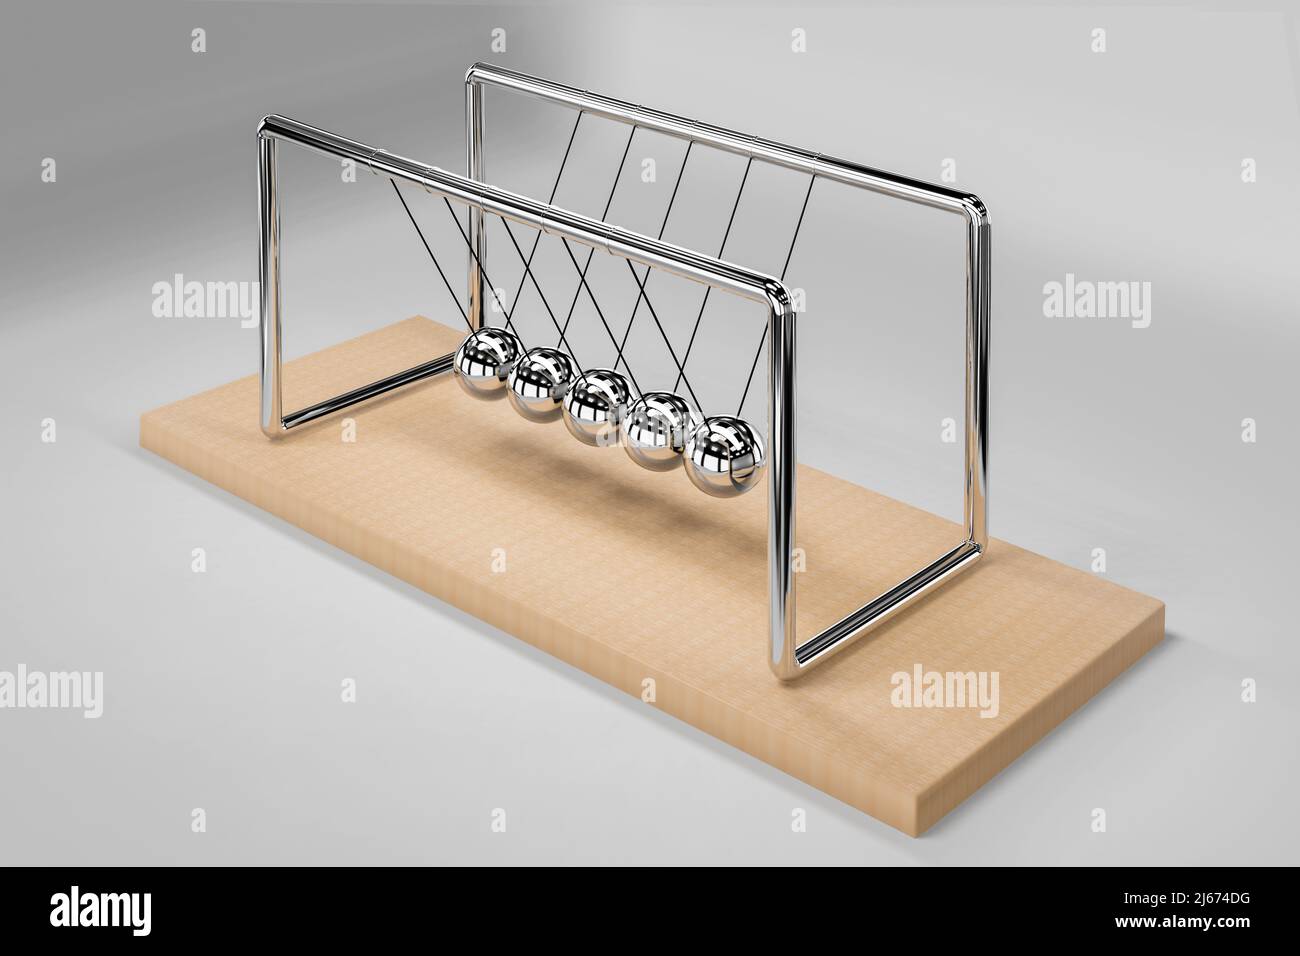 Newton's cradle - a device with swinging spheres - 3d rendering Stock Photo